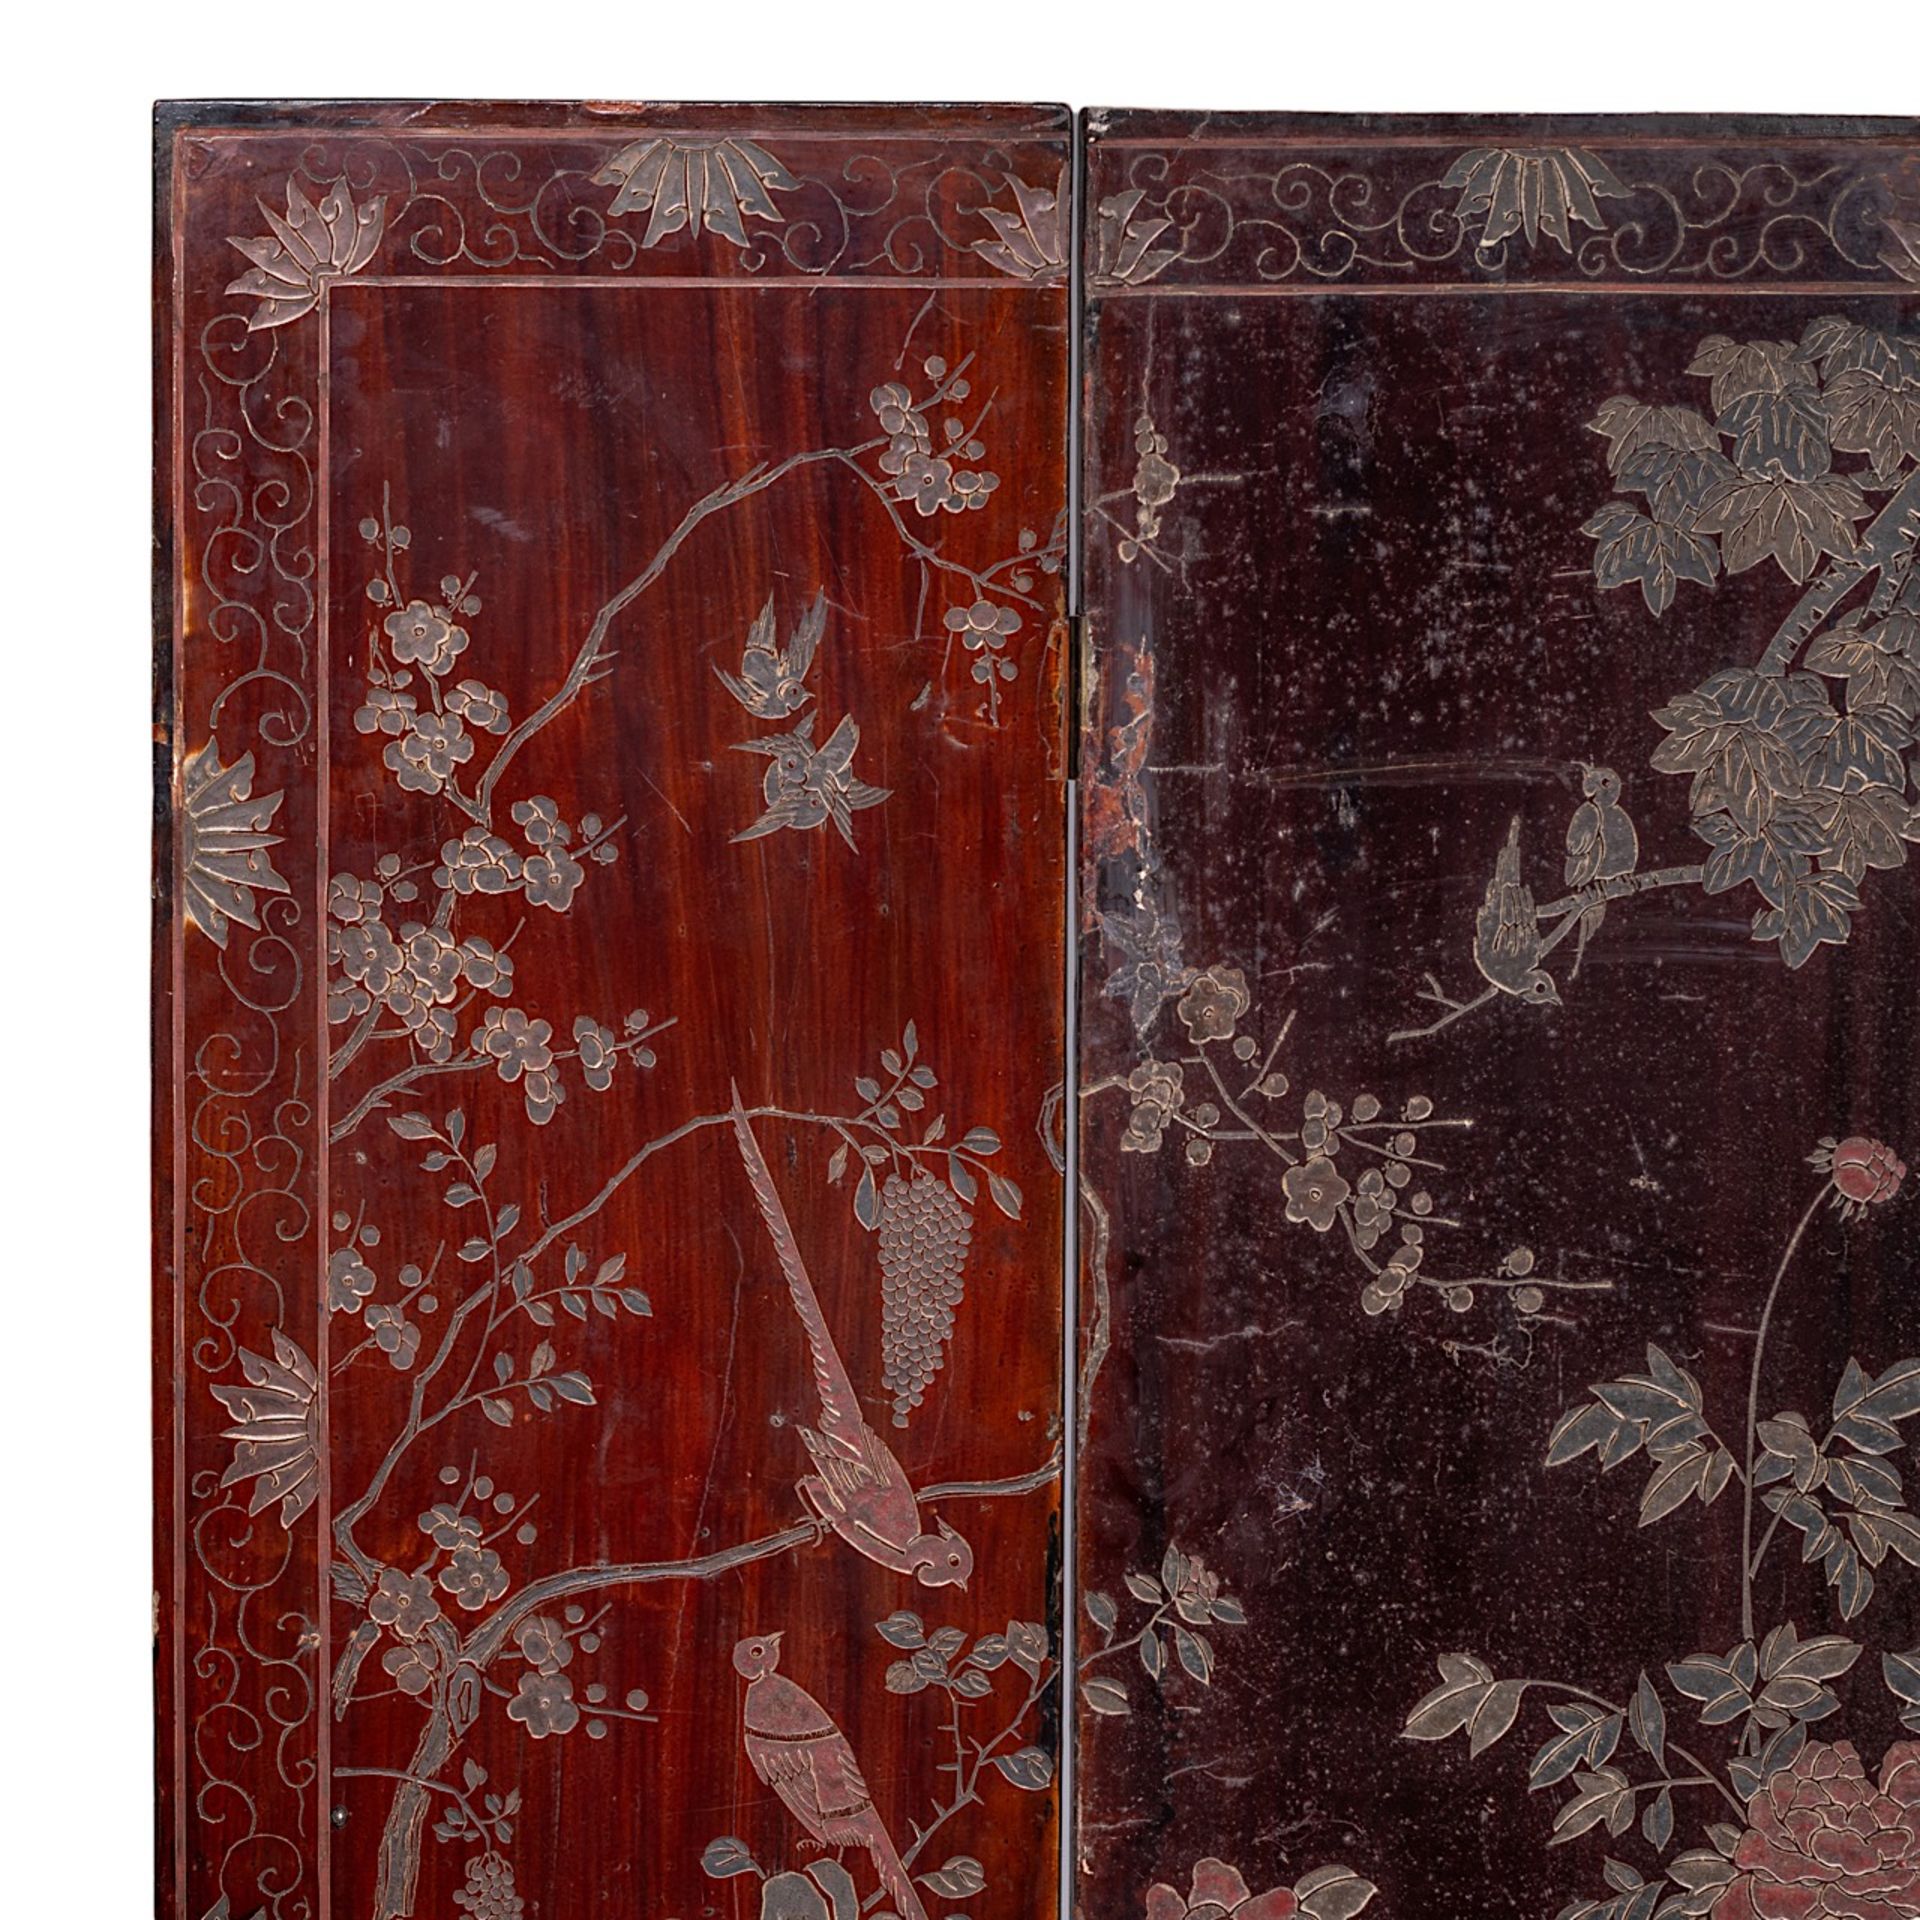 A Chinese coromandel lacquered four-panel chamber screen, late 18thC/19thC, H 162 - W 35,5 (each pan - Image 9 of 10